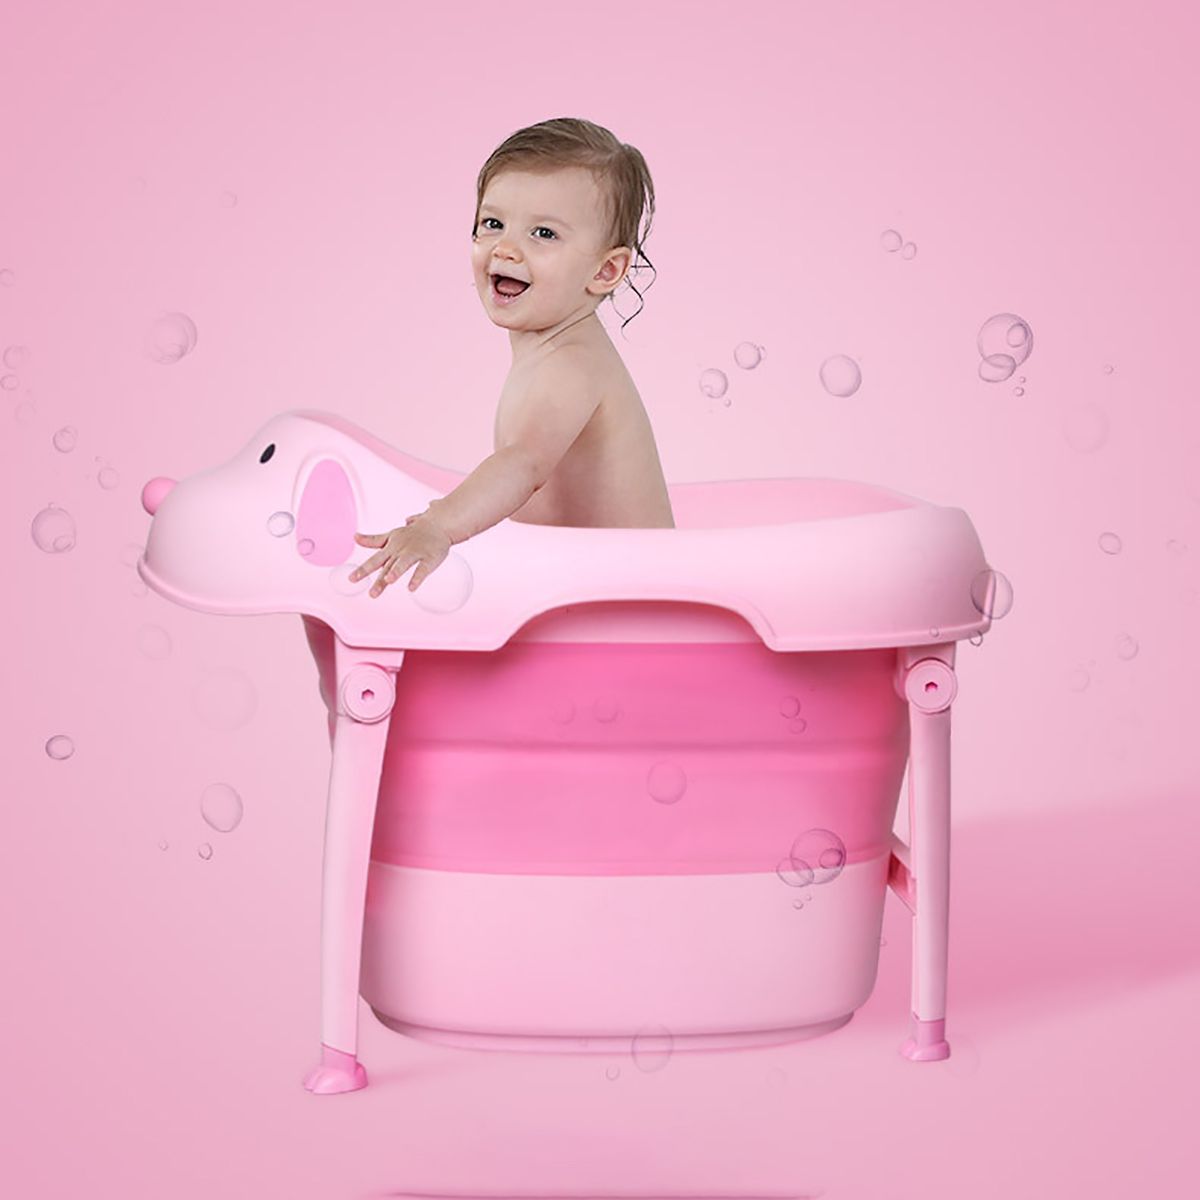 Folding-Childrens--Baby-Bath-Tub-Baby-Supplies-Water-Bucket-With-Chair-1554009